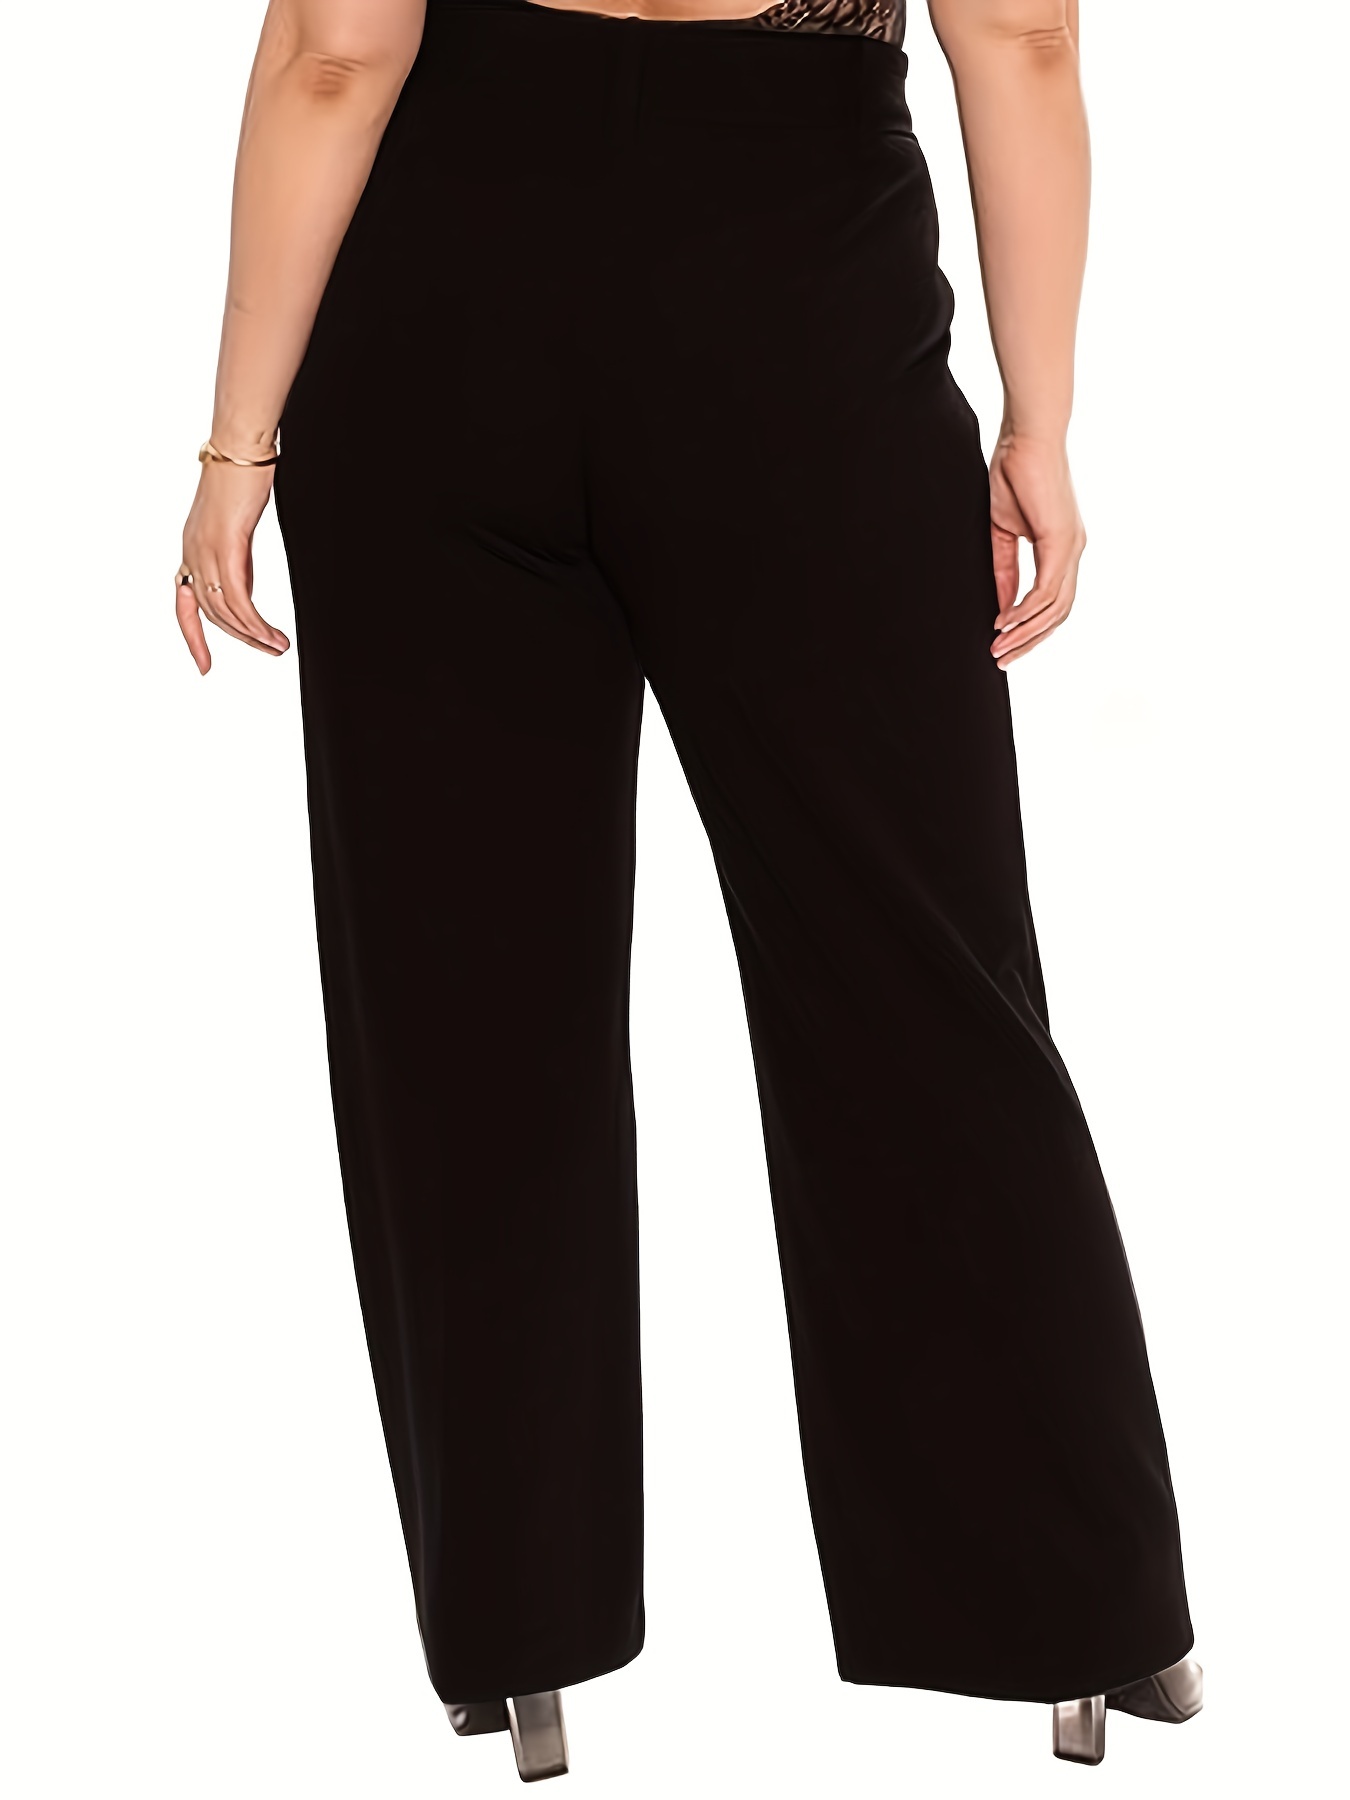 Plus Size Business Casual Pants, Women's Plus Solid Elastic High Rise  Medium Stretch Straight Leg Trousers With Pockets